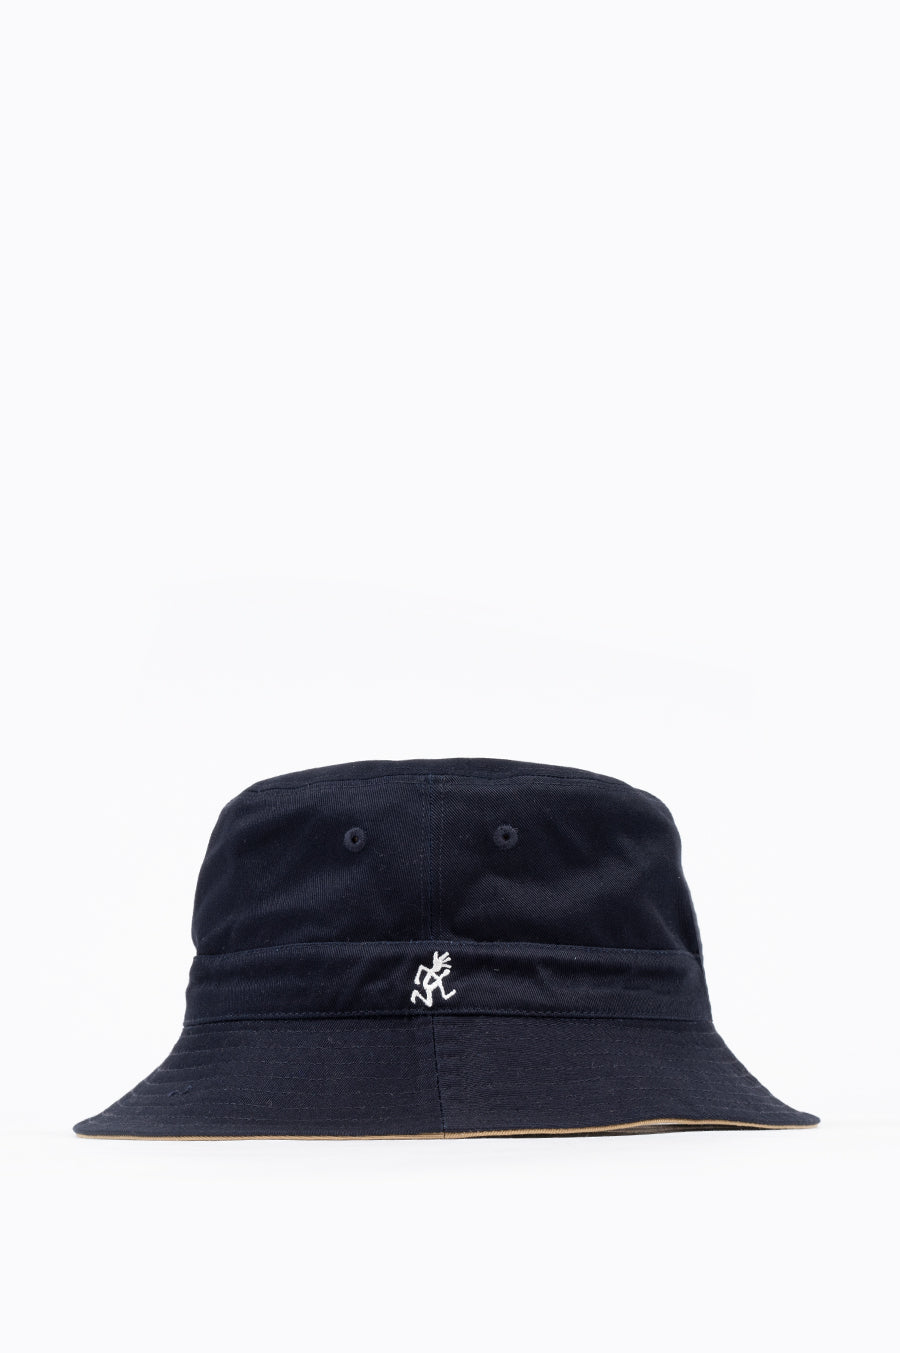 GRAMICCI REVERSIBLE HAT CHINO X DOUBLE NAVY